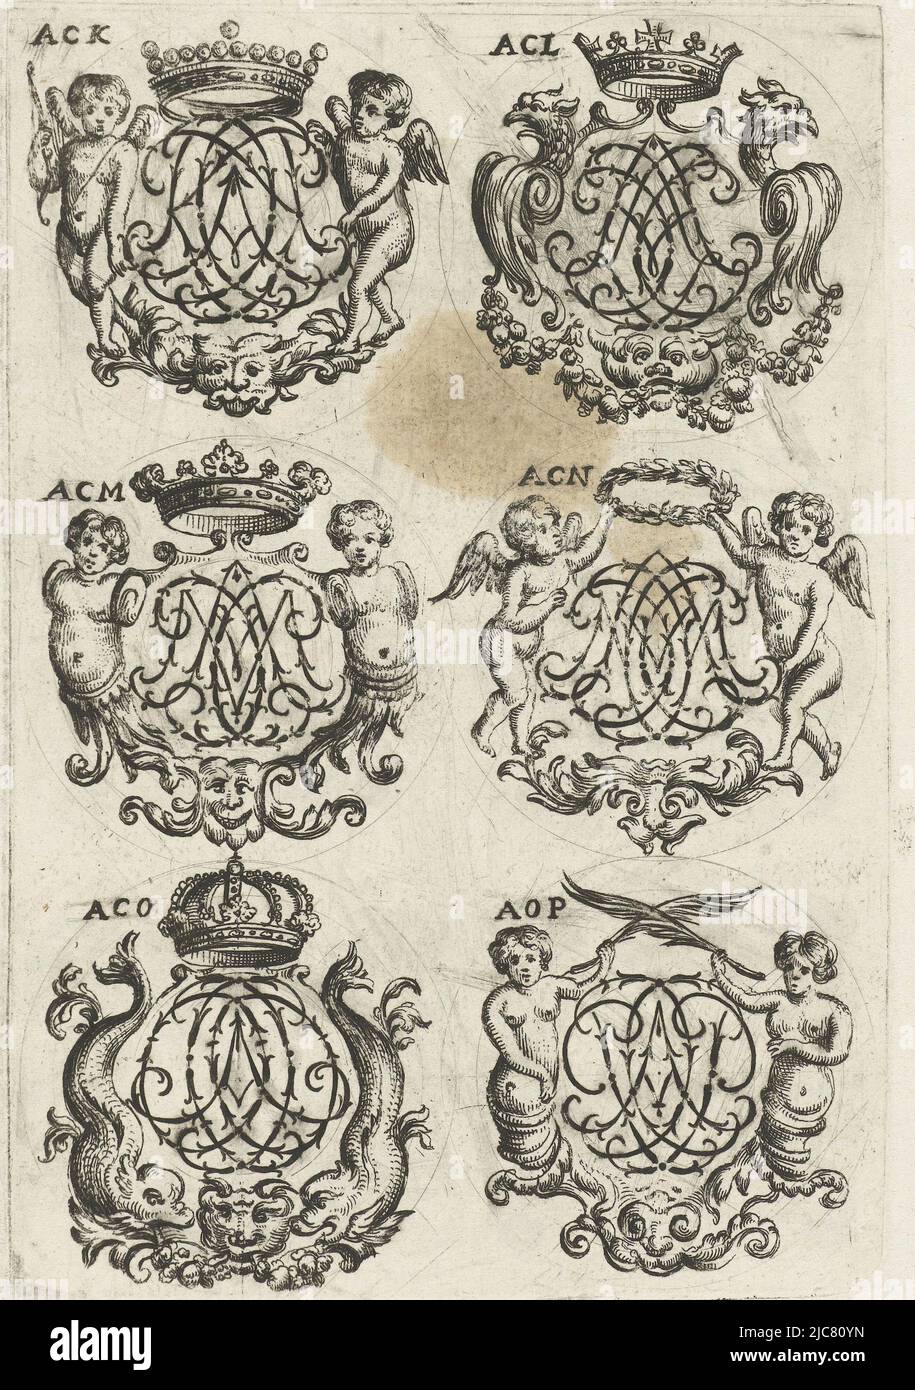 From series of 29 partly numbered sheets with numeral monograms, Six crowned cartouches with letter monograms (ACK-AOP) Livre nouveau et utile , print maker: Daniel de Lafeuille, intermediary draughtsman: Daniel de Lafeuille, publisher: Daniel de Lafeuille, Amsterdam, (possibly), c. 1690 - c. 1691, paper, engraving, h 140 mm × w 95 mm Stock Photo